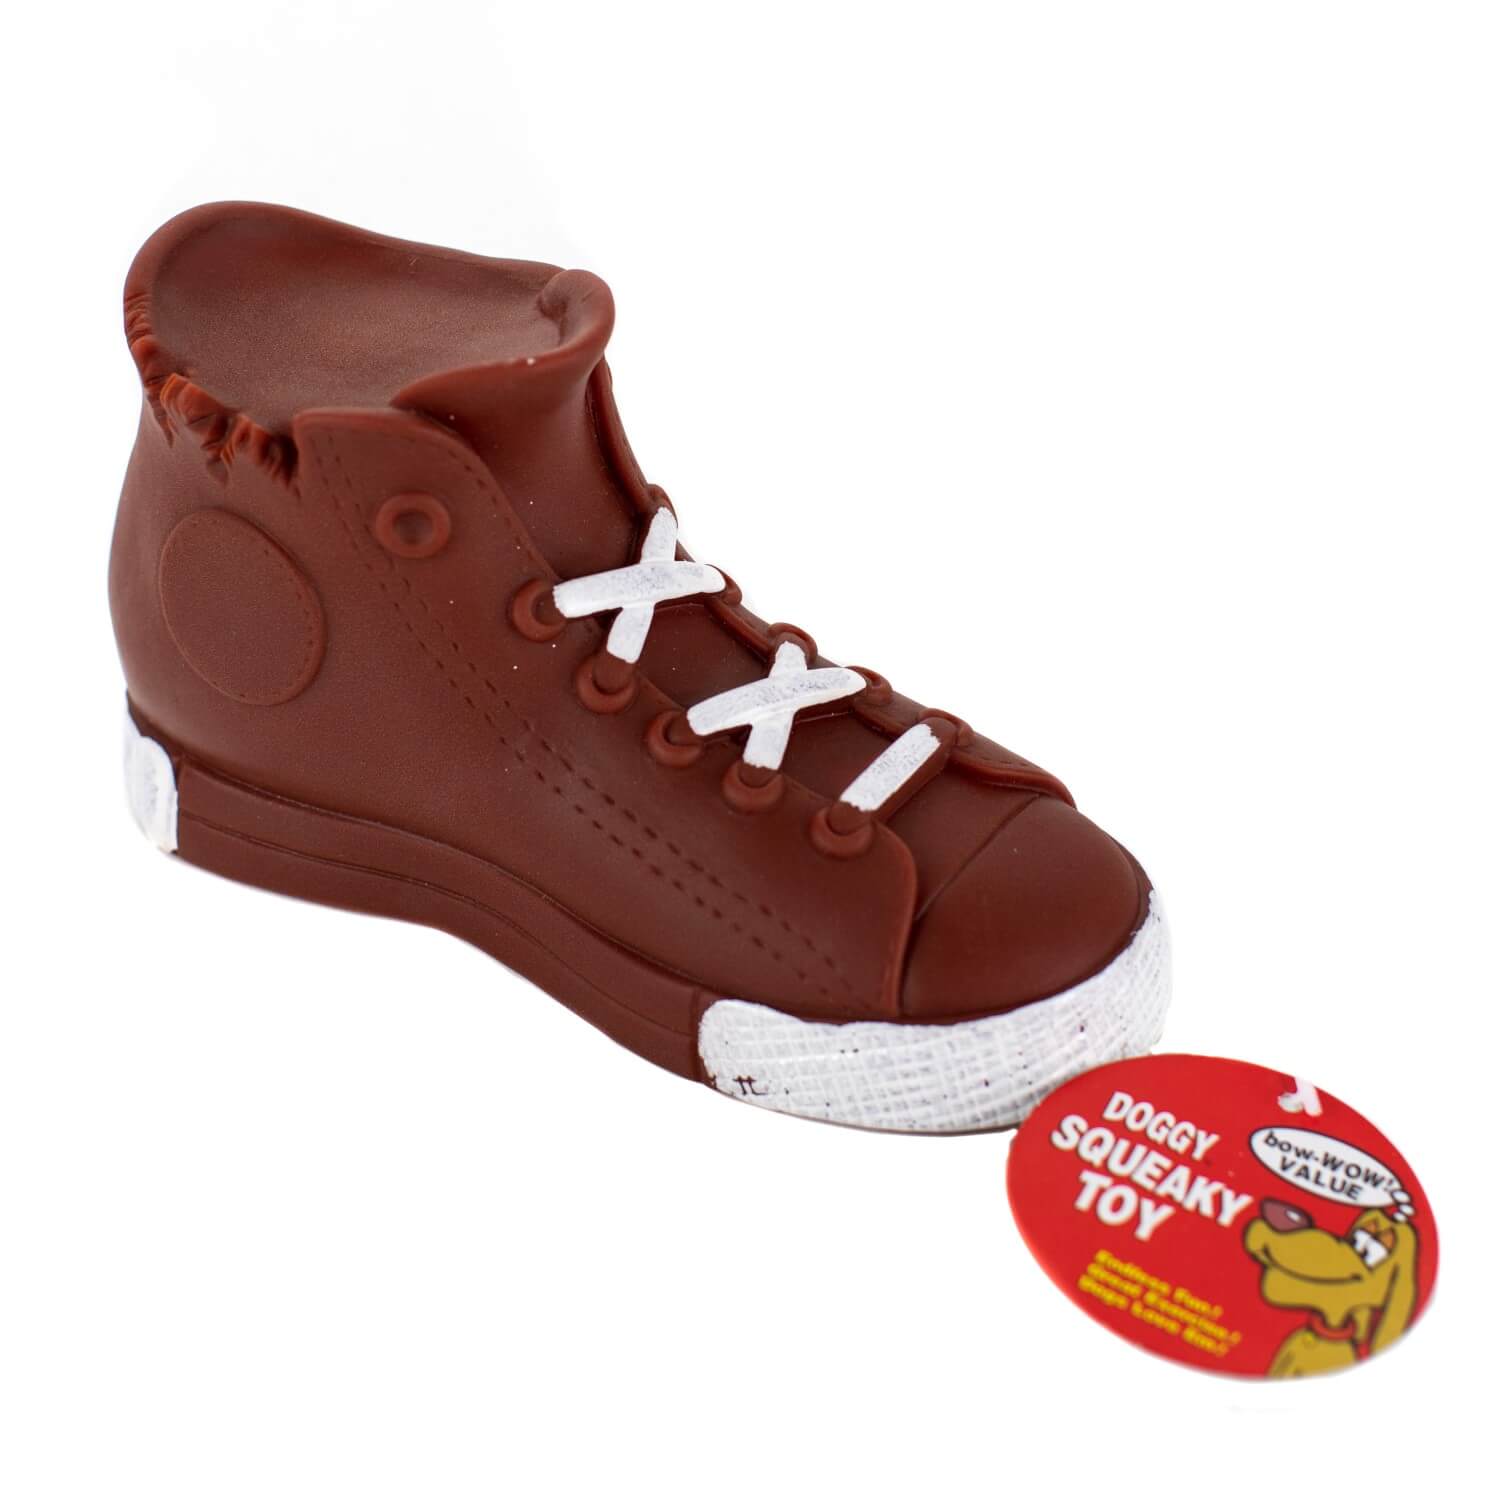 A brown Squeaky High-Top Chewy Toy with white laces and a tag. The toe is pointing towards the right which gives you a side view of the circle at the heel of the sneaker.